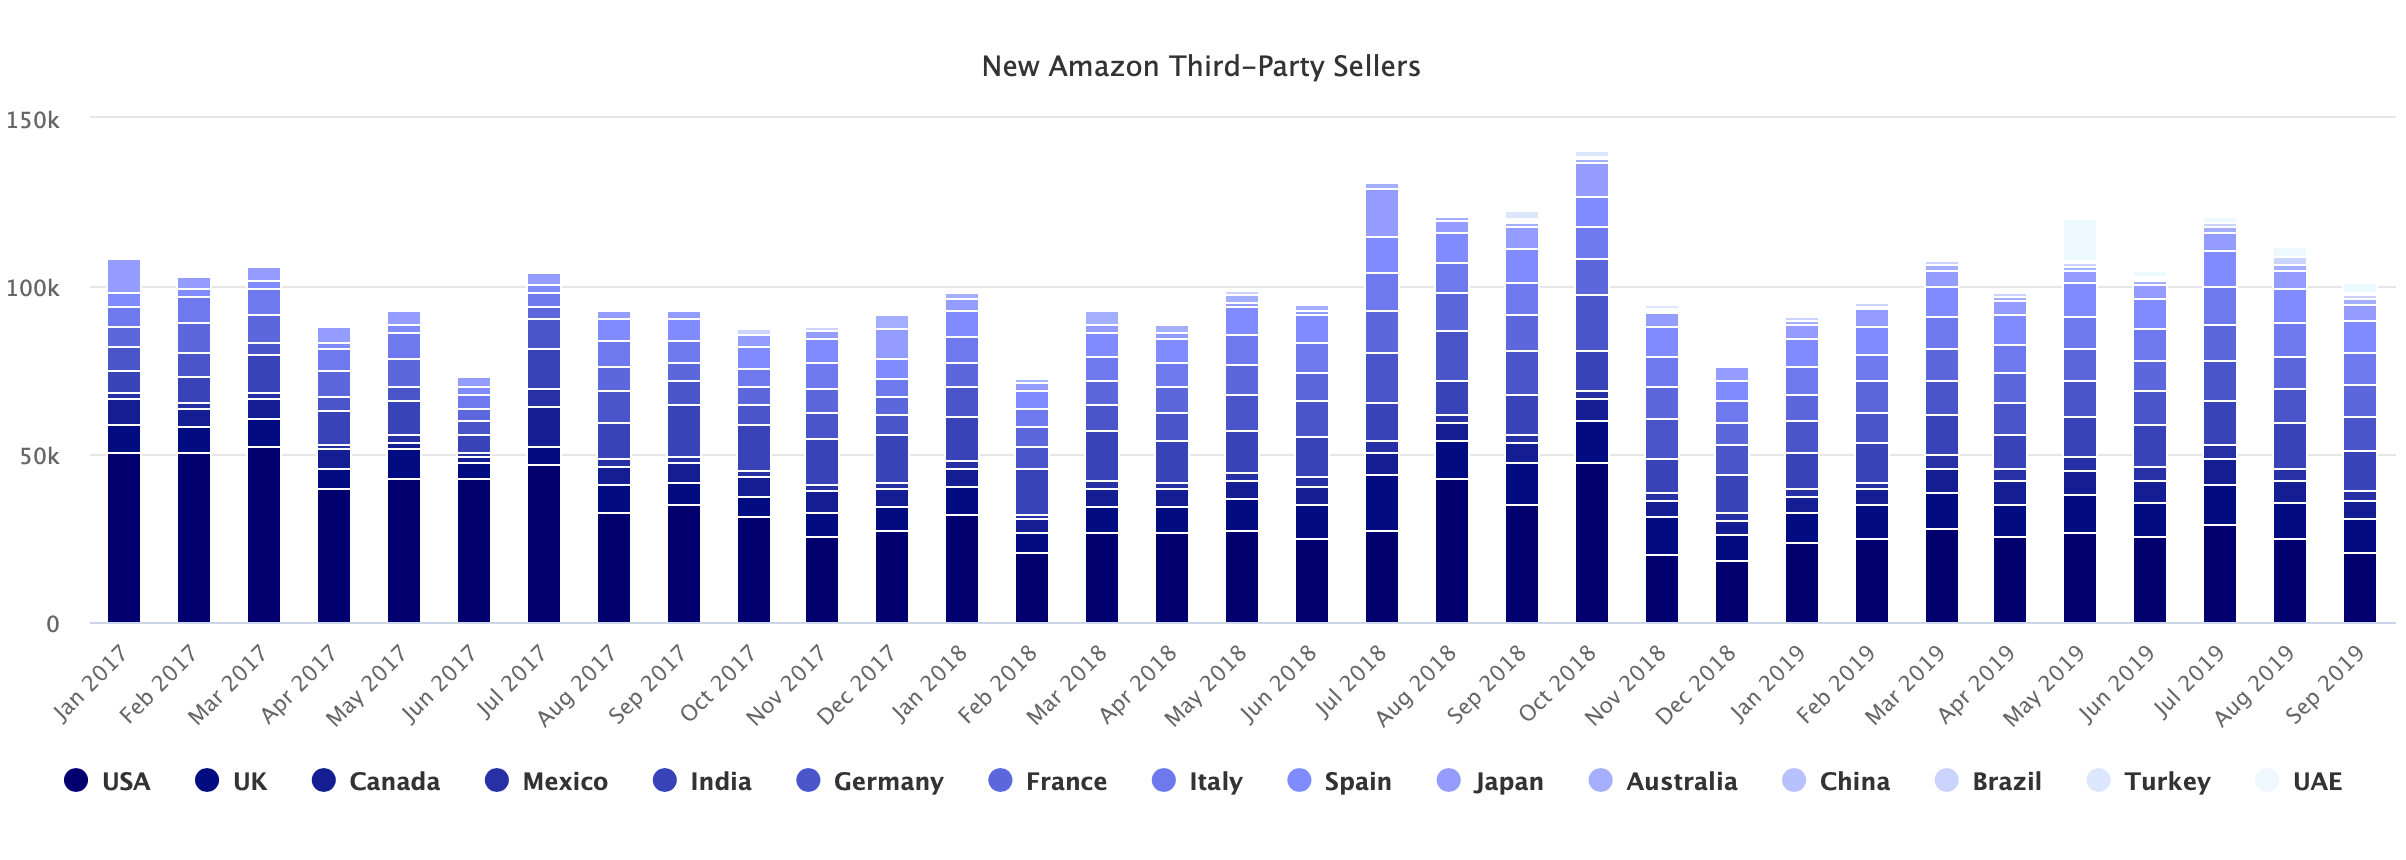 New Amazon Third-Party Sellers